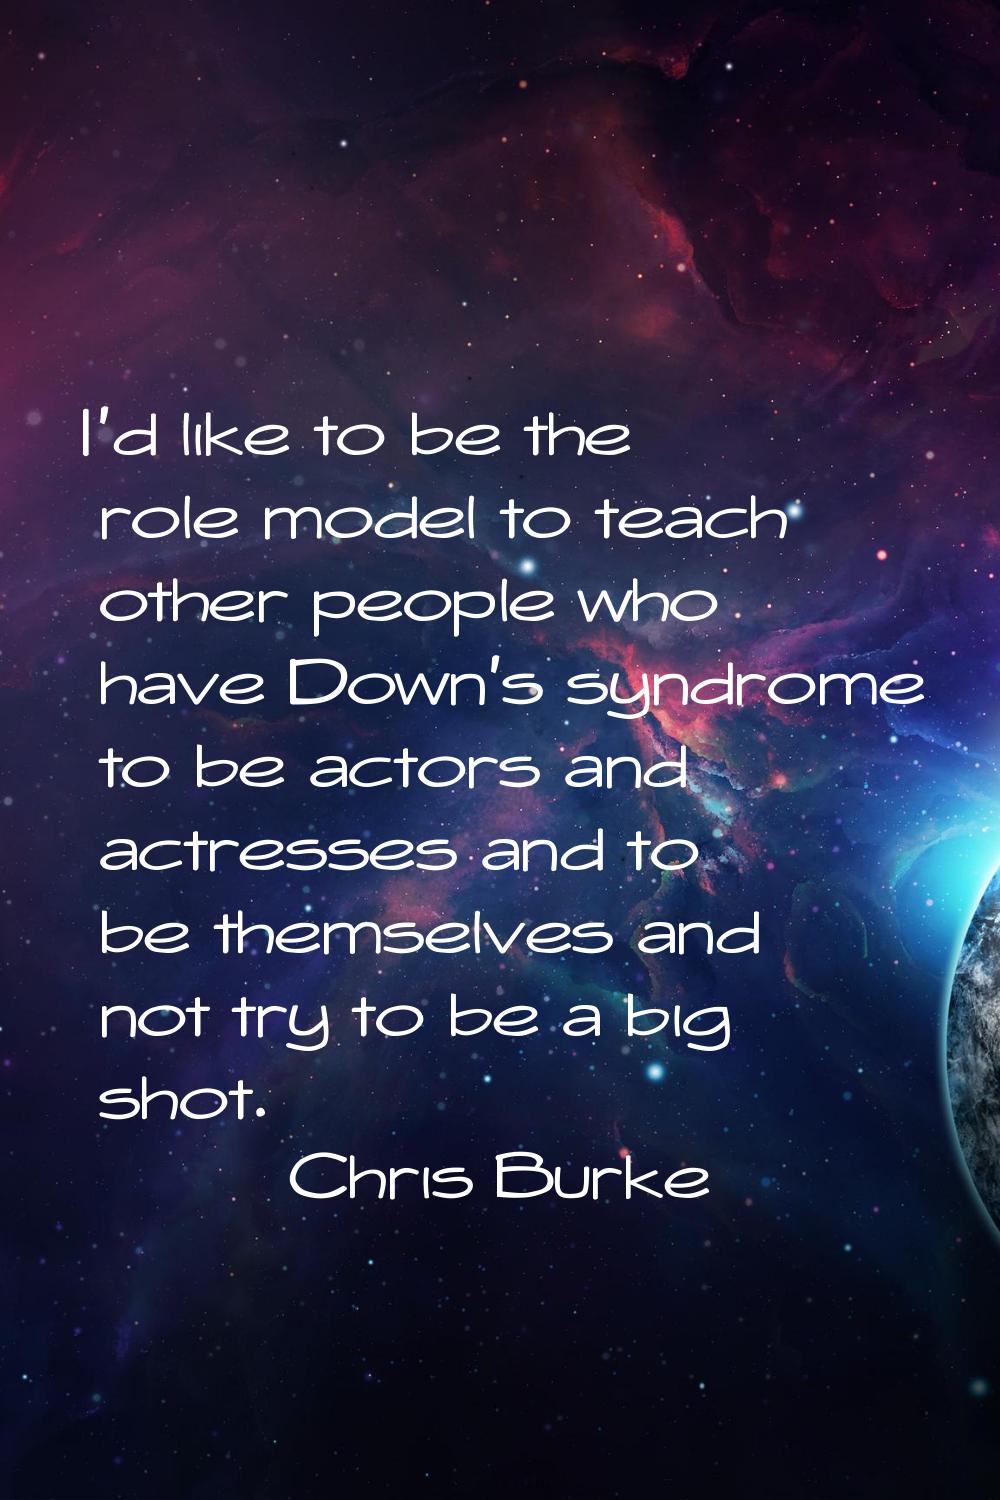 I'd like to be the role model to teach other people who have Down's syndrome to be actors and actre